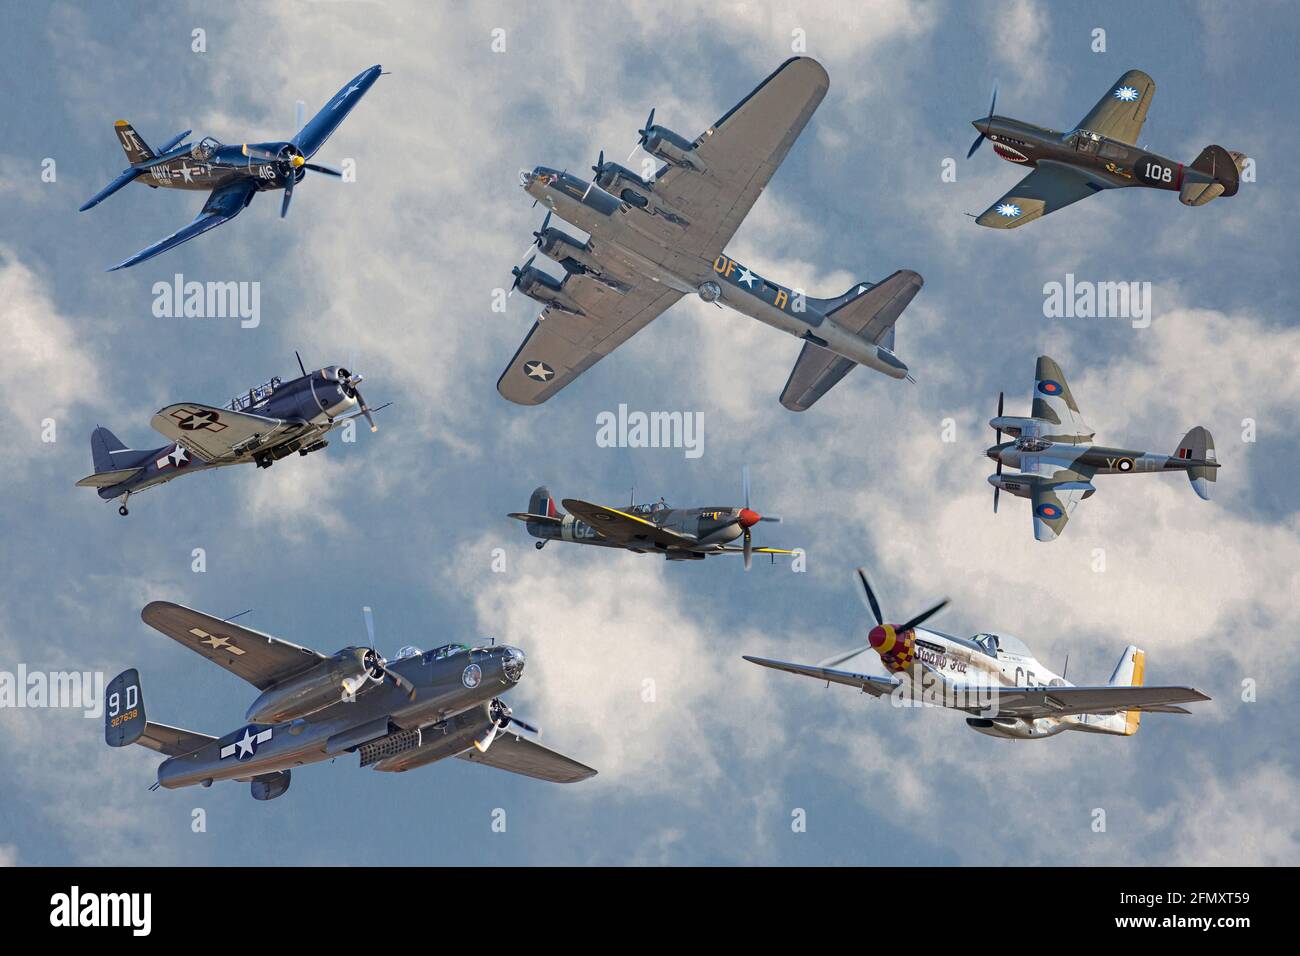 A collage of Allied aircraft that helped win World War II.  Photos taken at the annual Warbirds Over Monroe Air Show in Monroe, North Carolina. Stock Photo